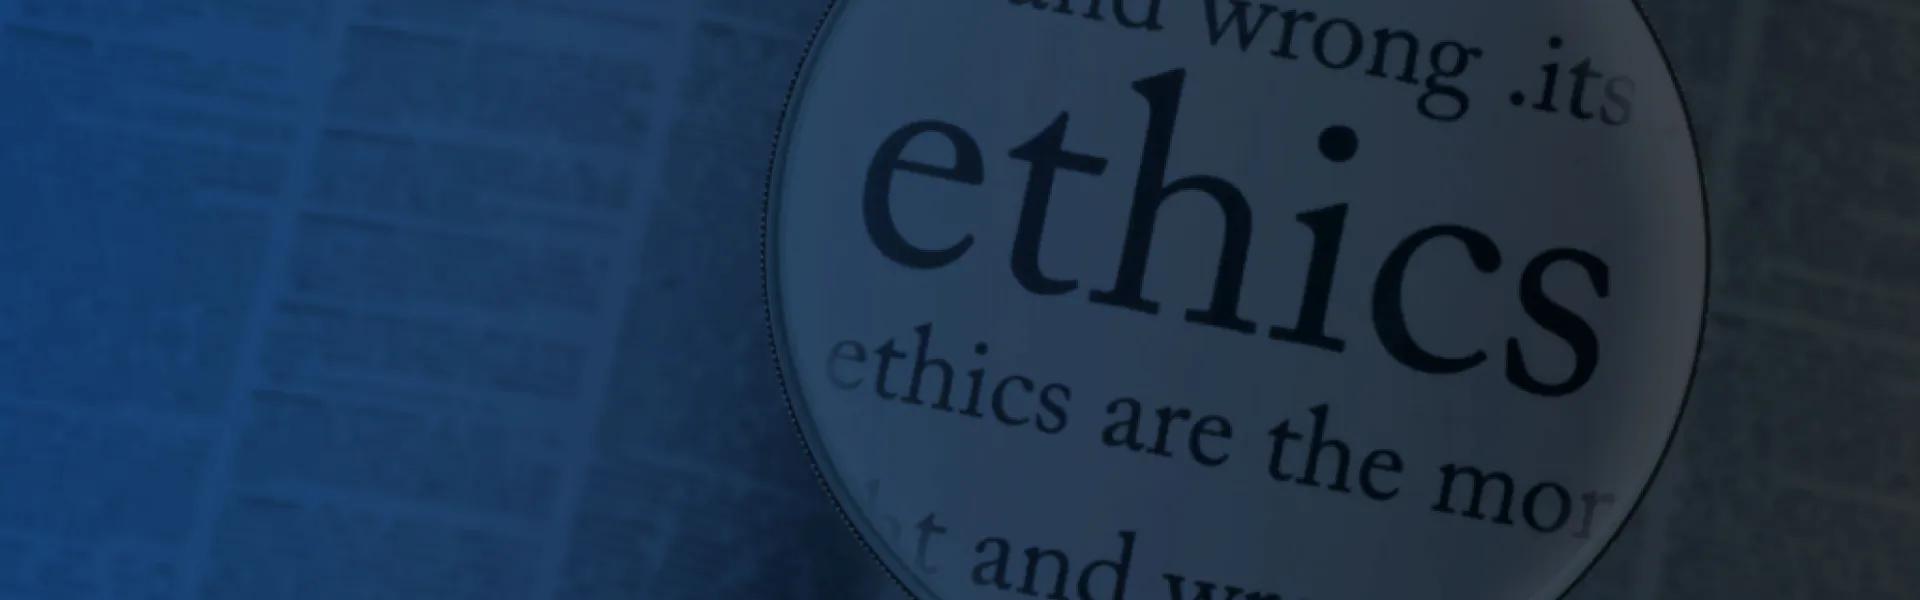 Research Ethics Workshop